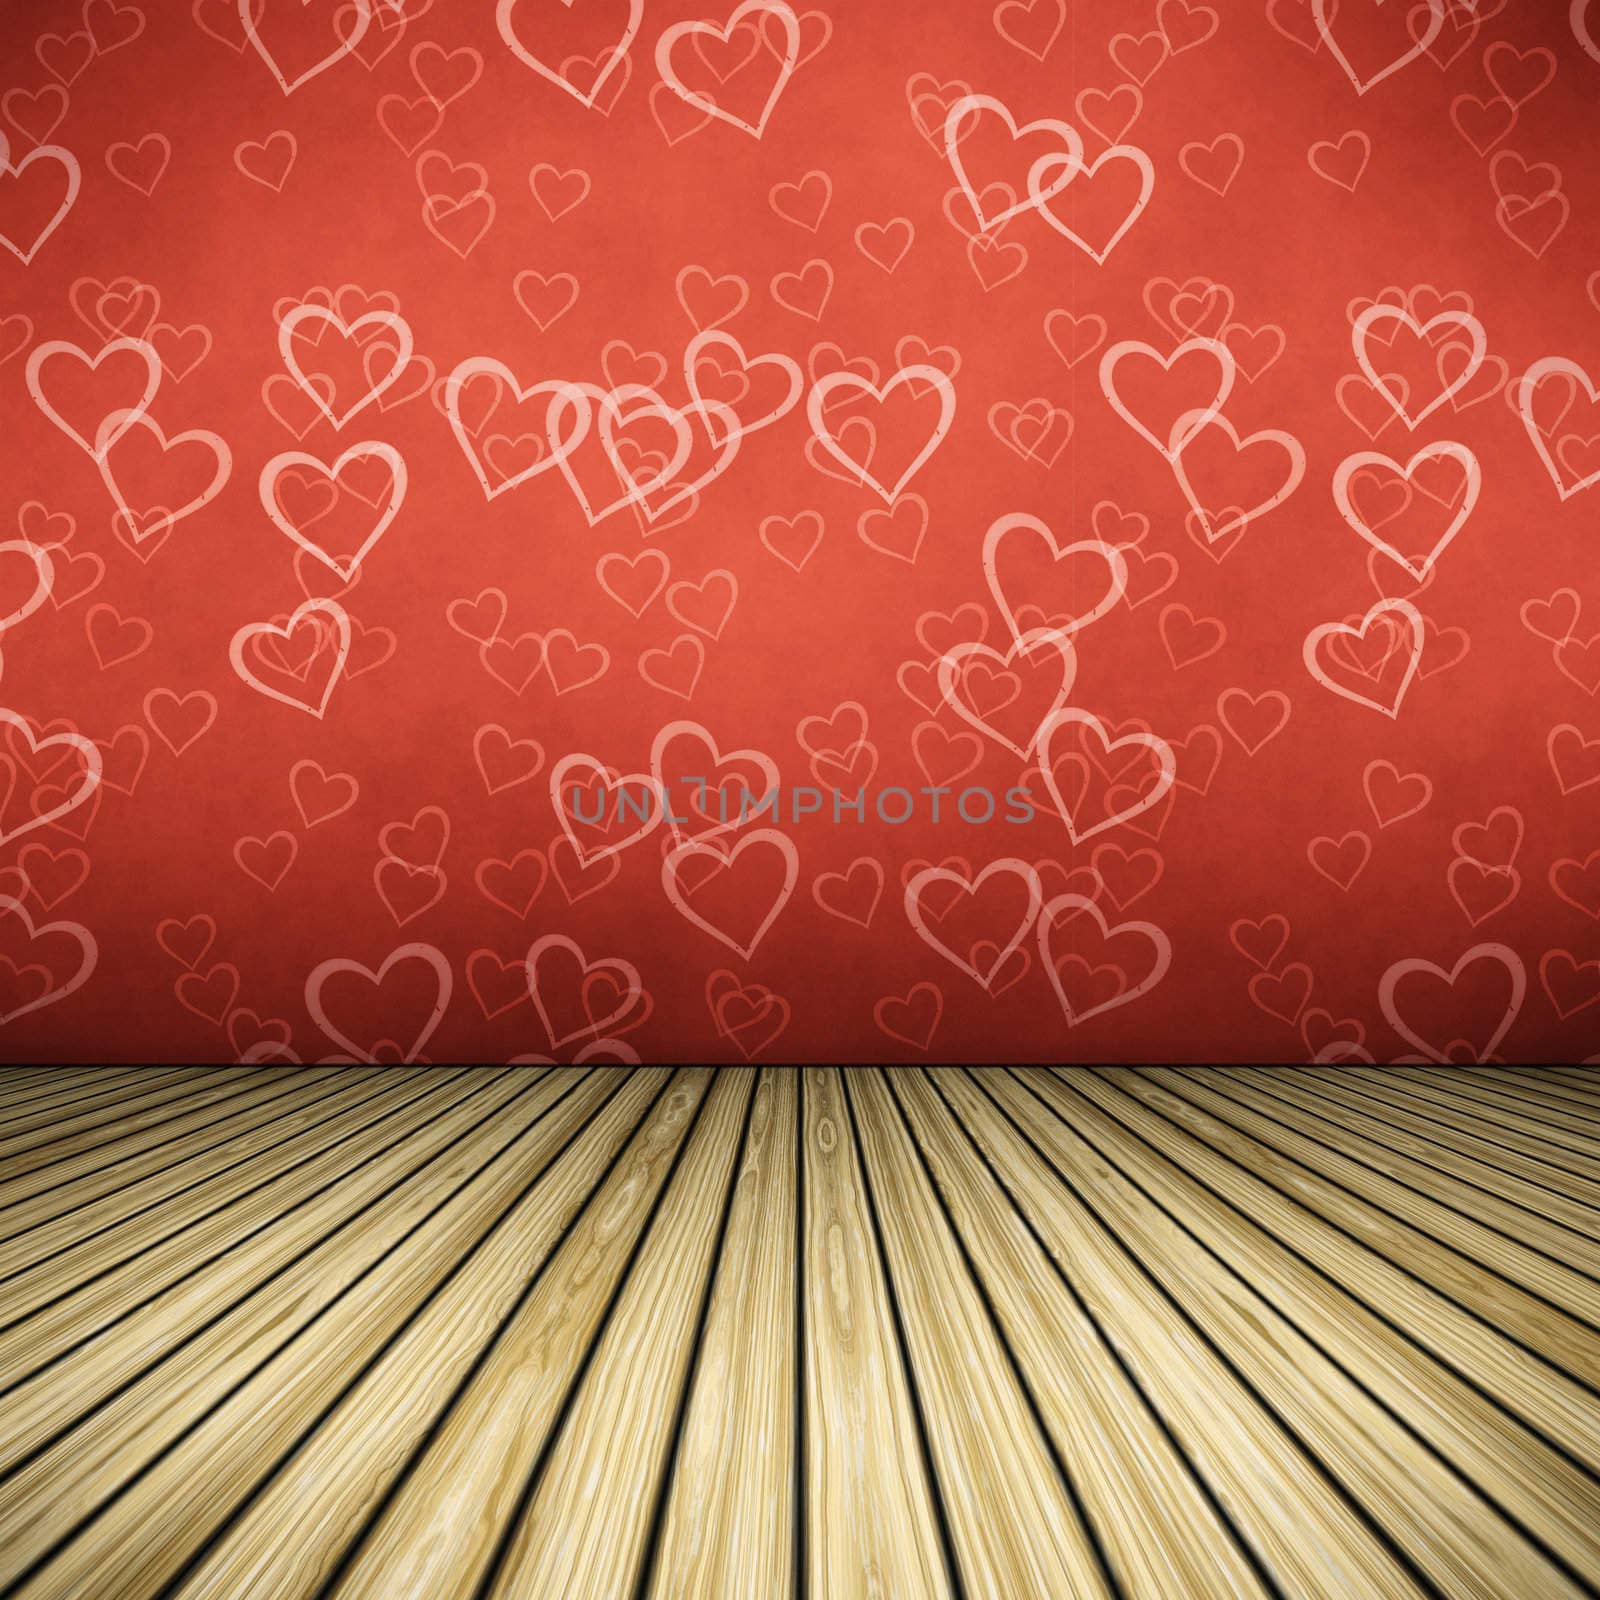 An image of a nice hearts floor for your content